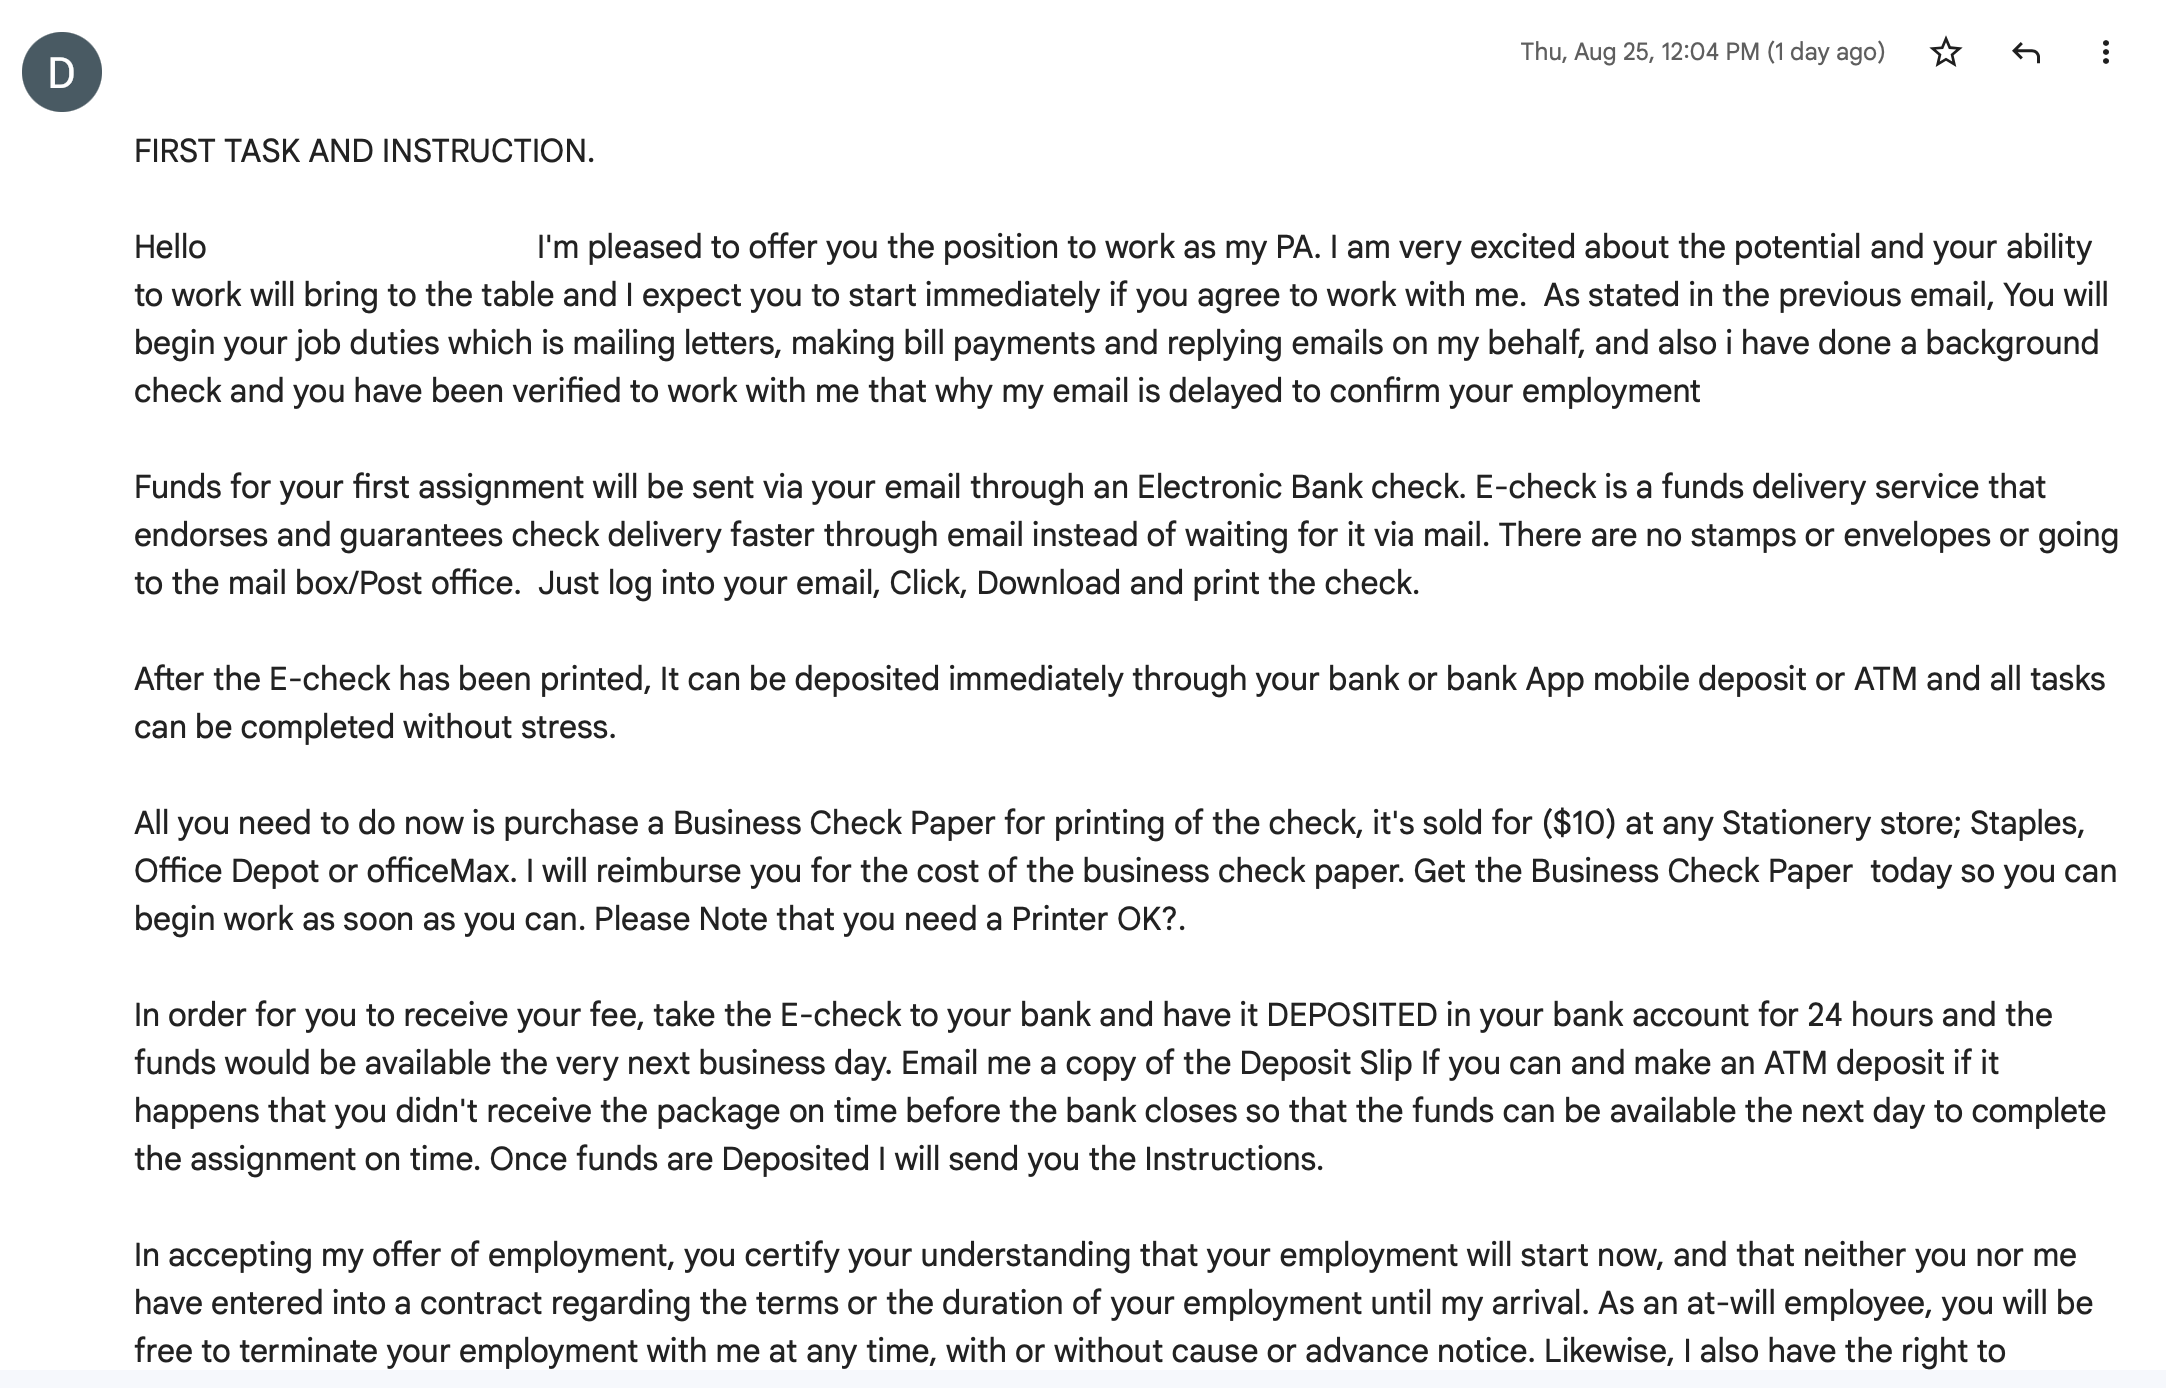 scam email follow up example